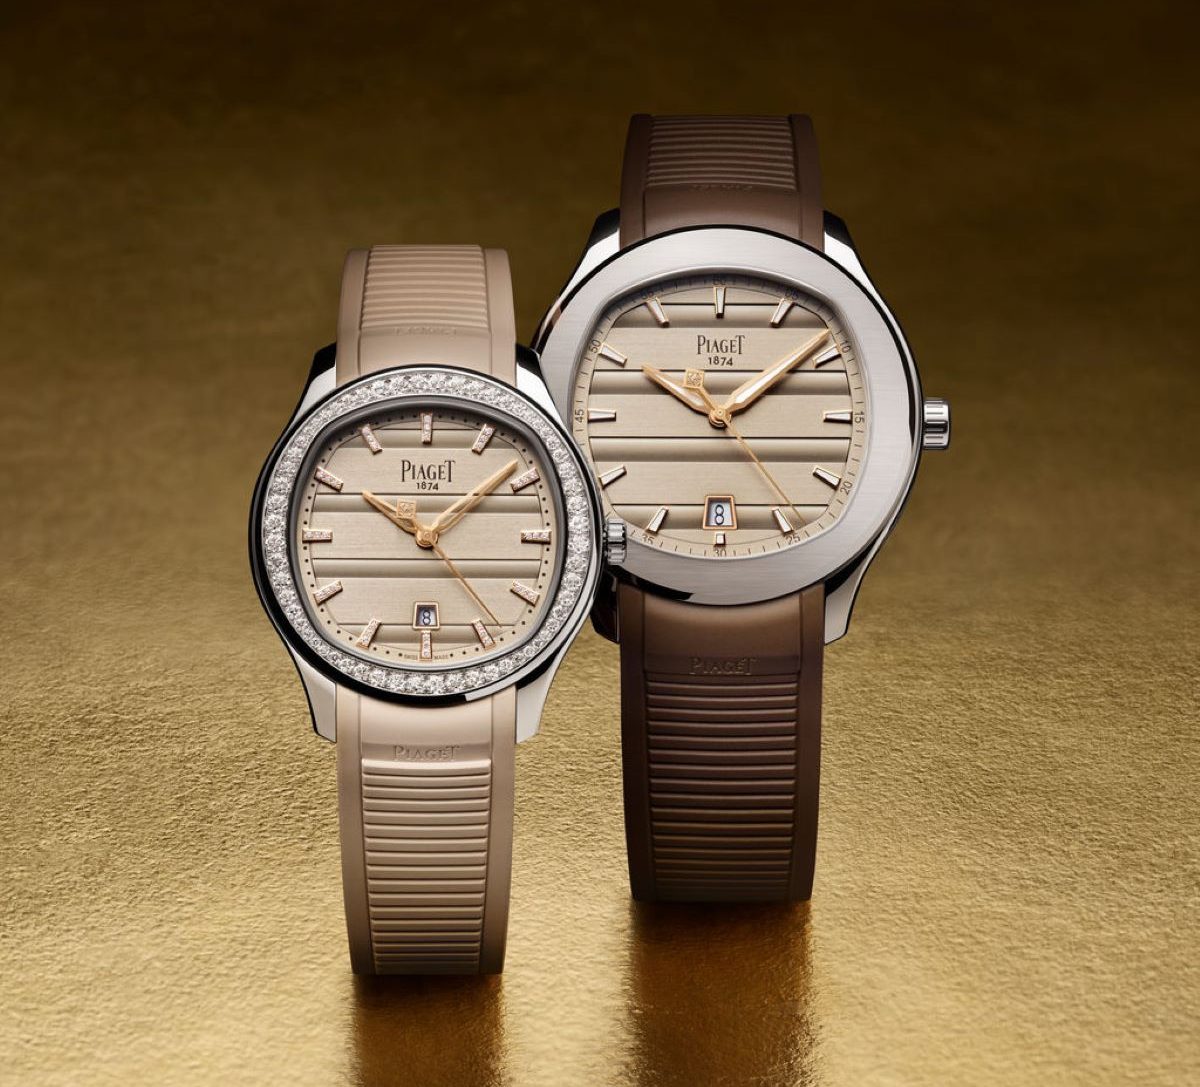 The Piaget Polo Date duo.